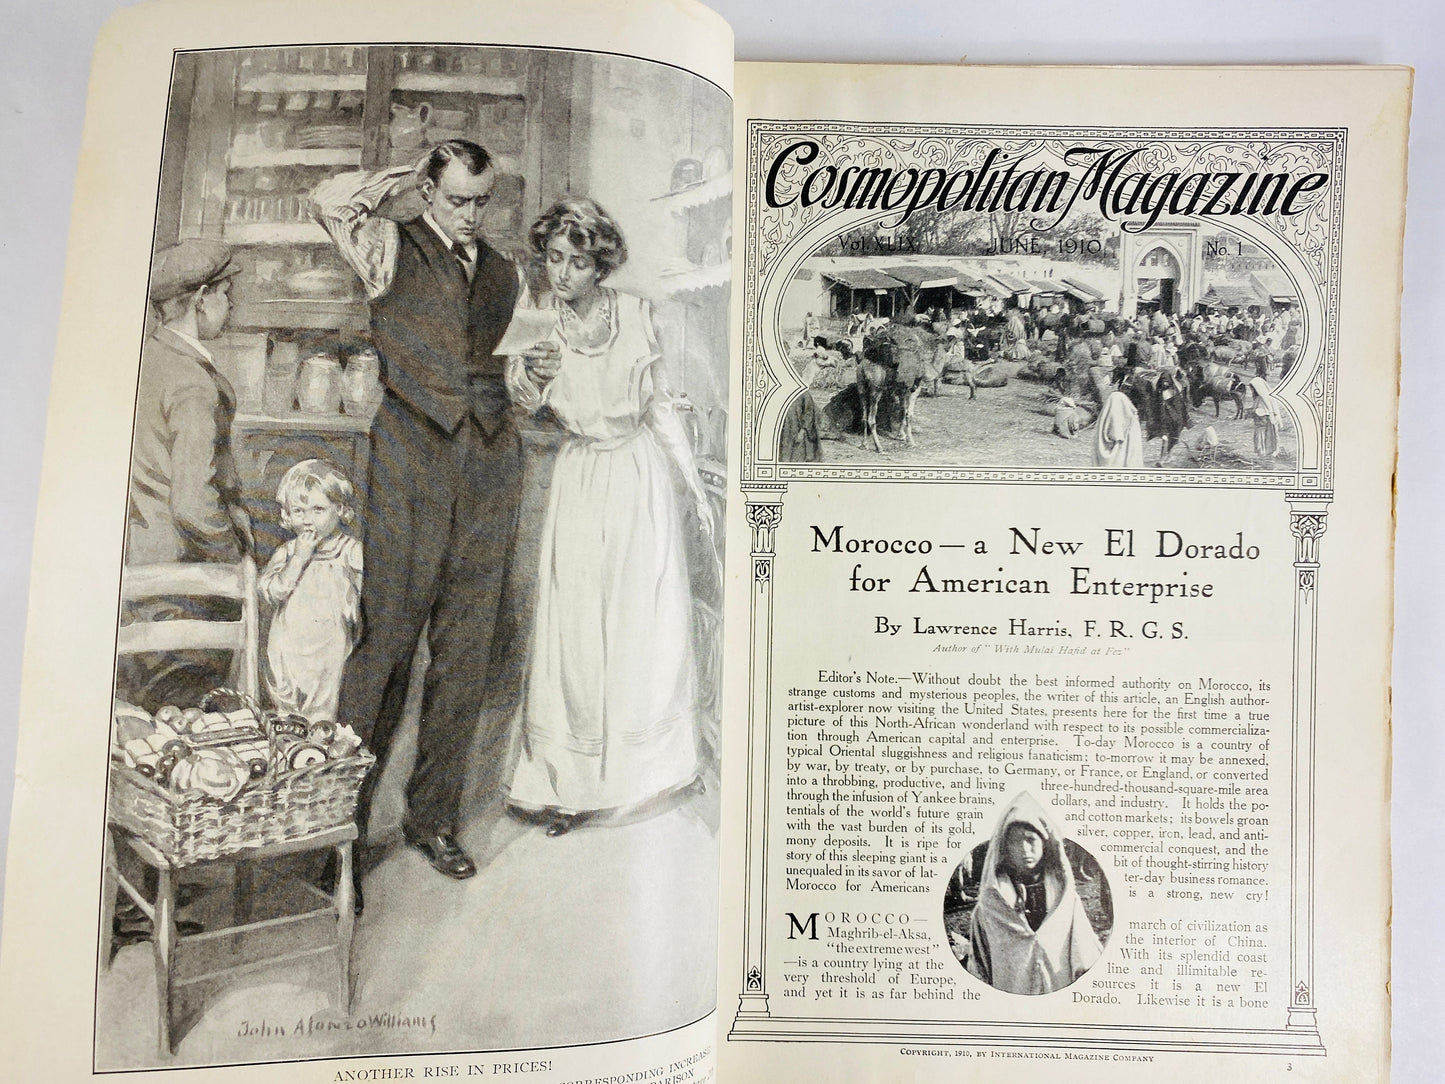 1910 vintage Cosmopolitan Magazine featuring Socialism and stories by E Phillips Oppenheim & PG Wodehouse and a Jewish Artisan in Morocco